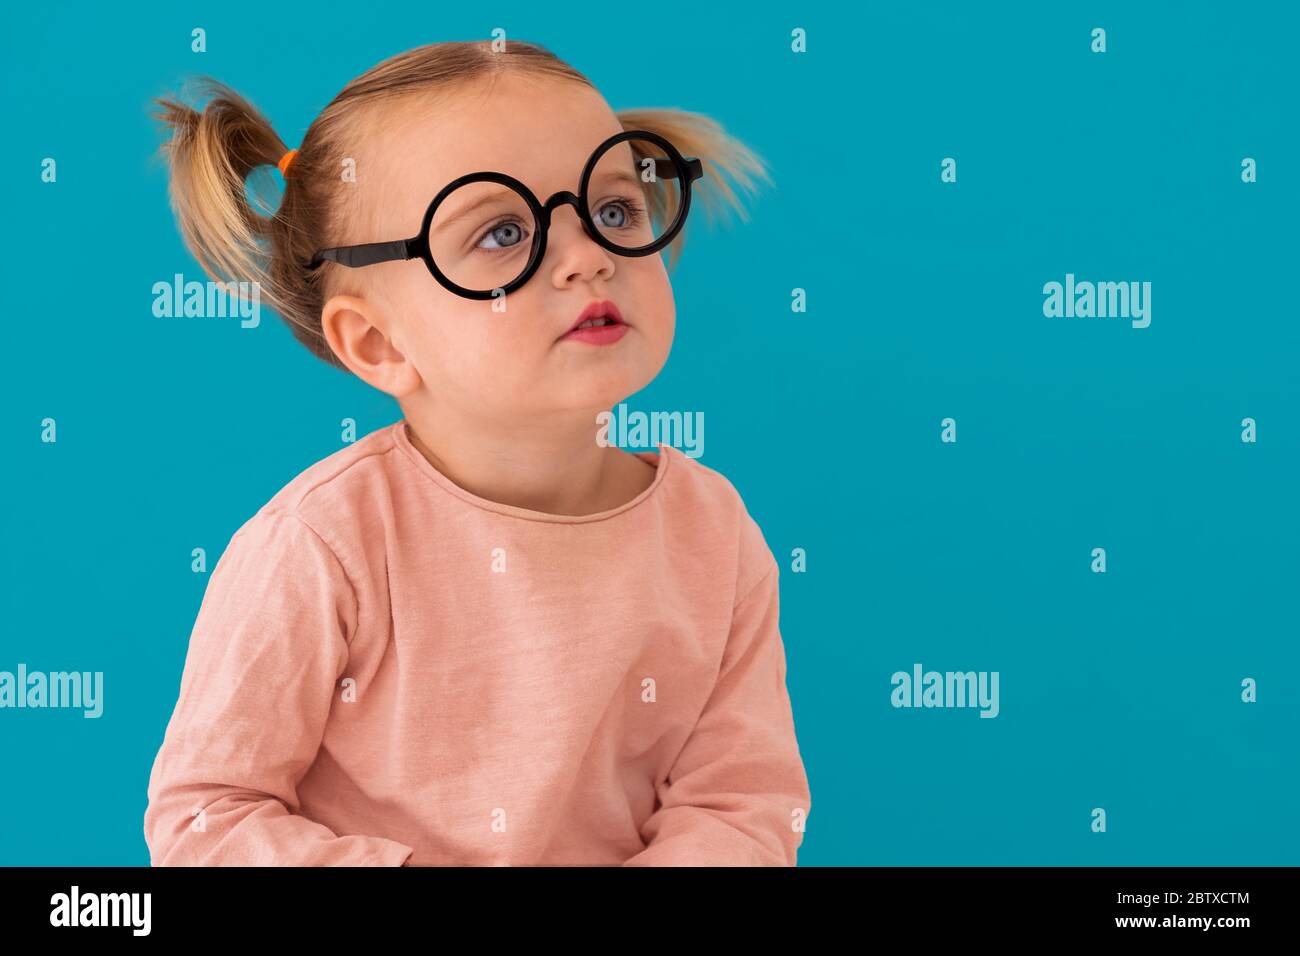 Portrait of a kid with round glasses Stock Photo